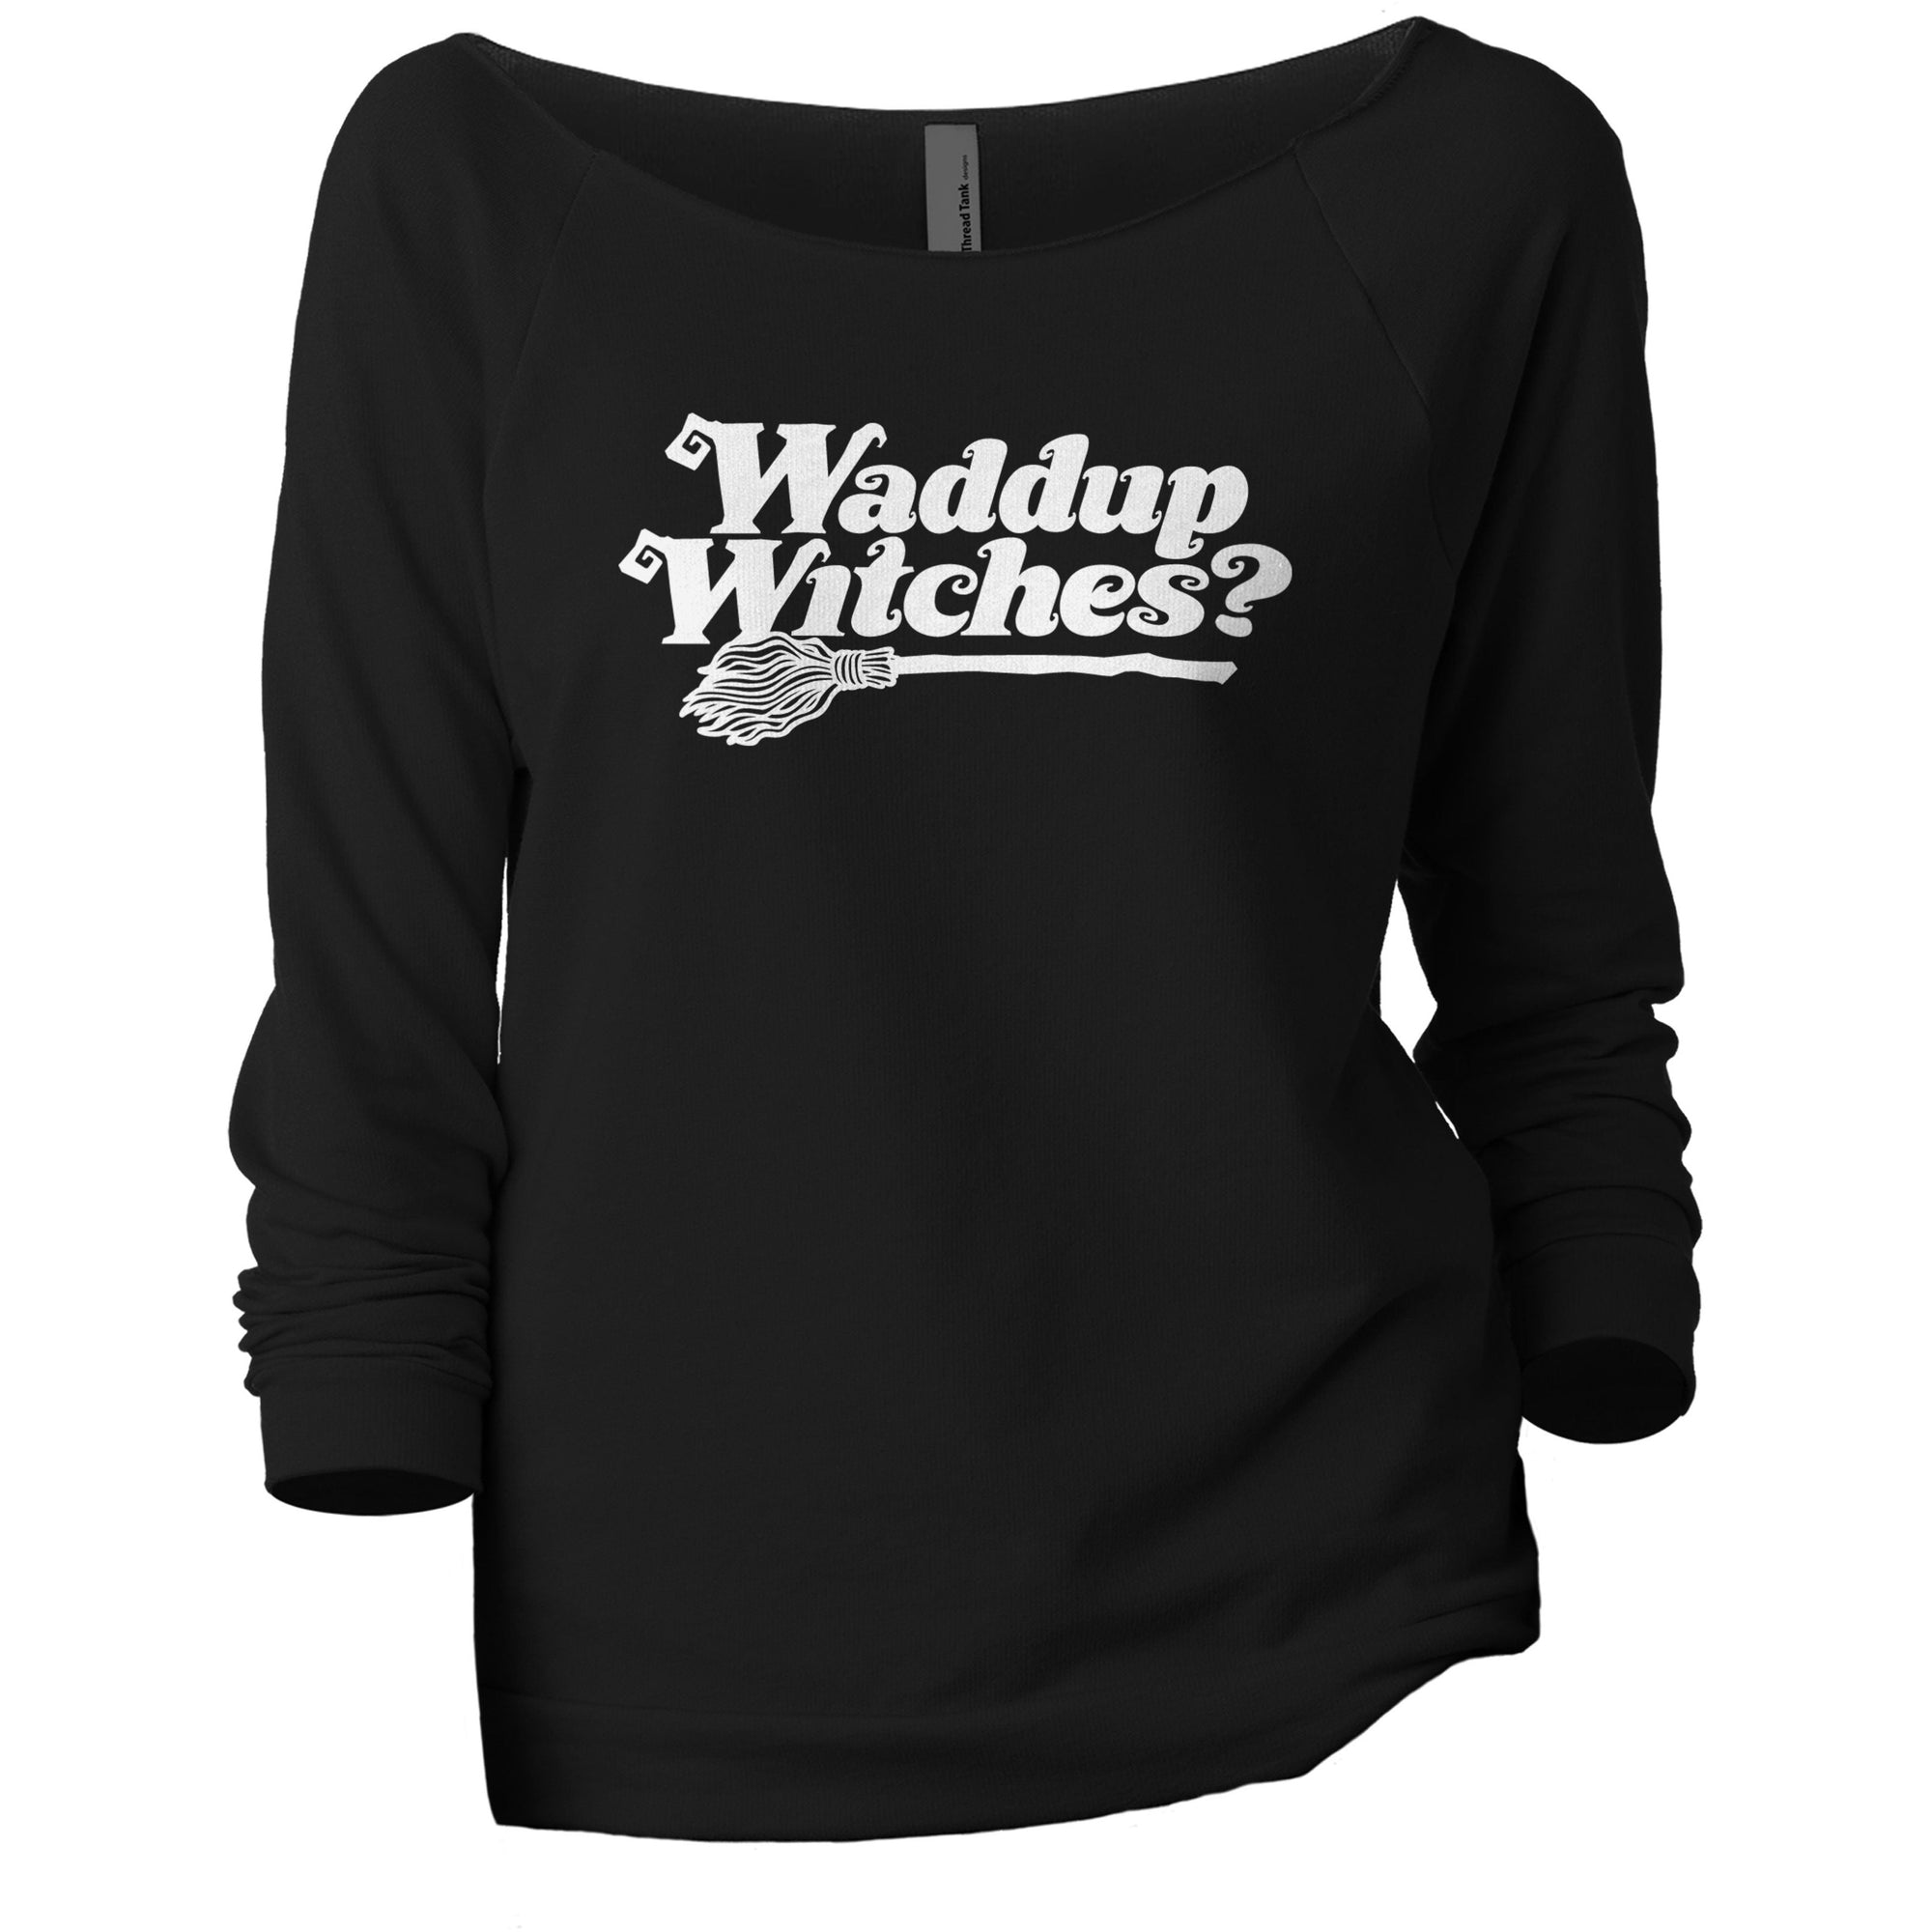 Waddup Witches?